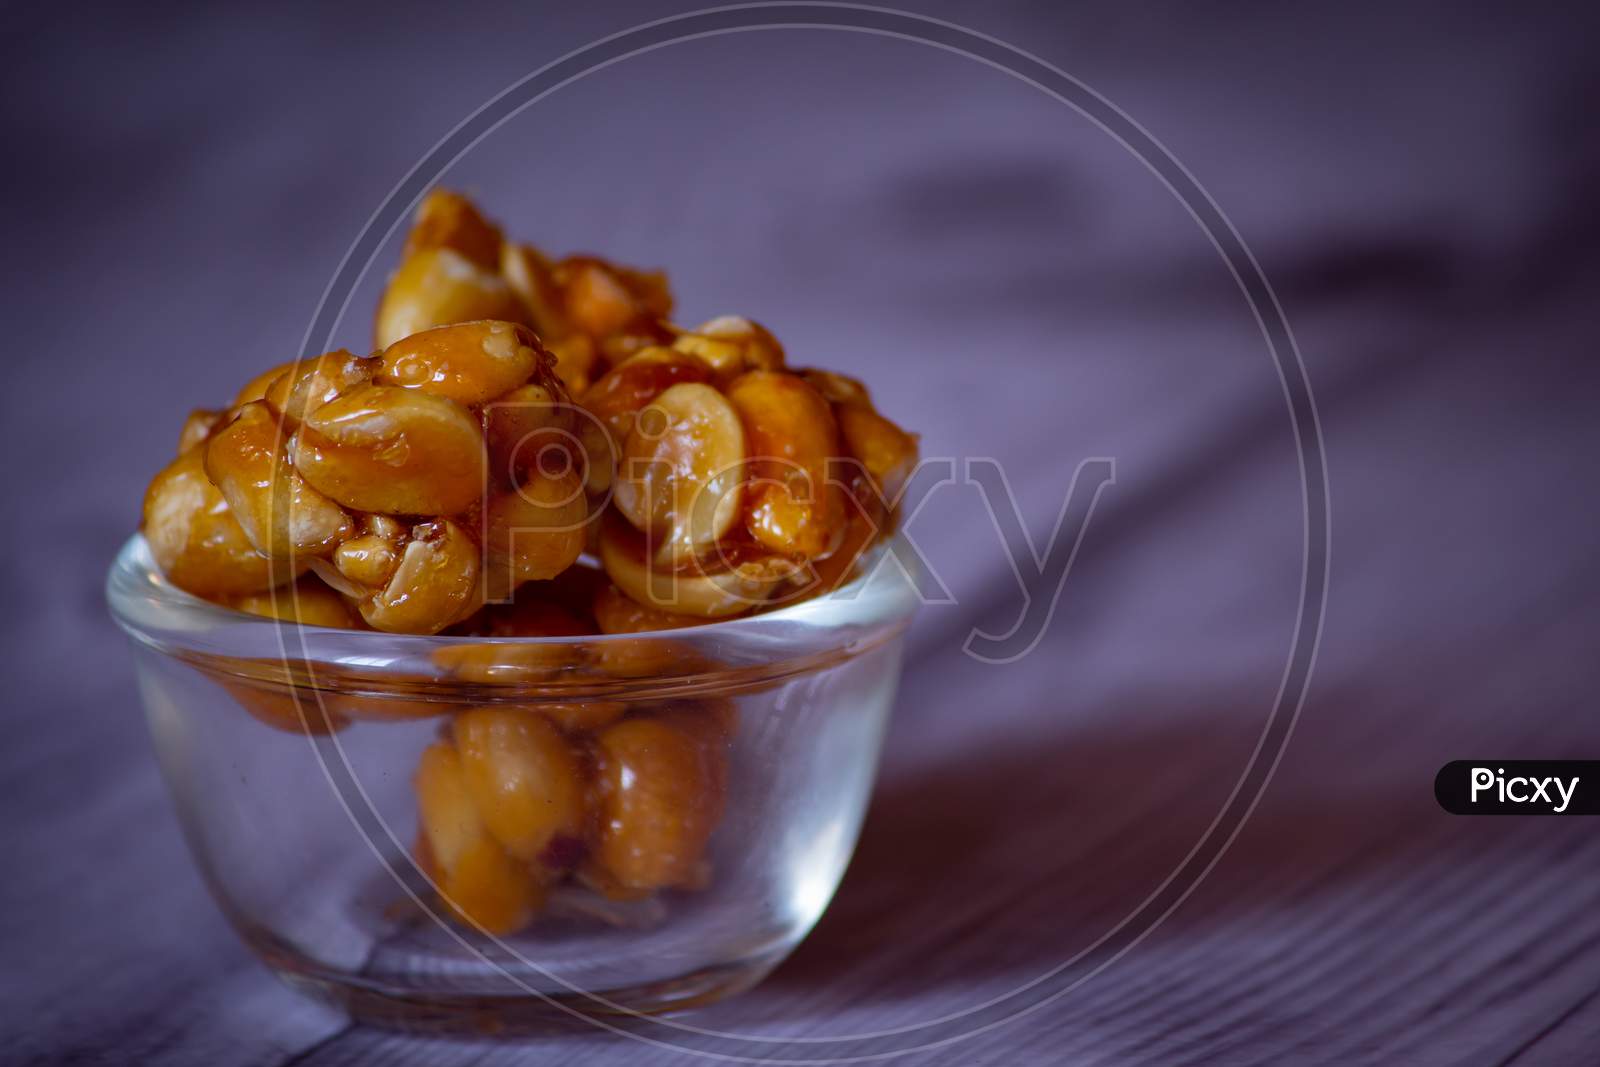 View Of Groundnut Balls(Also Called As Chikki), Which Is A Popular Indian Sweet Made From Groundnut And Jaggery.